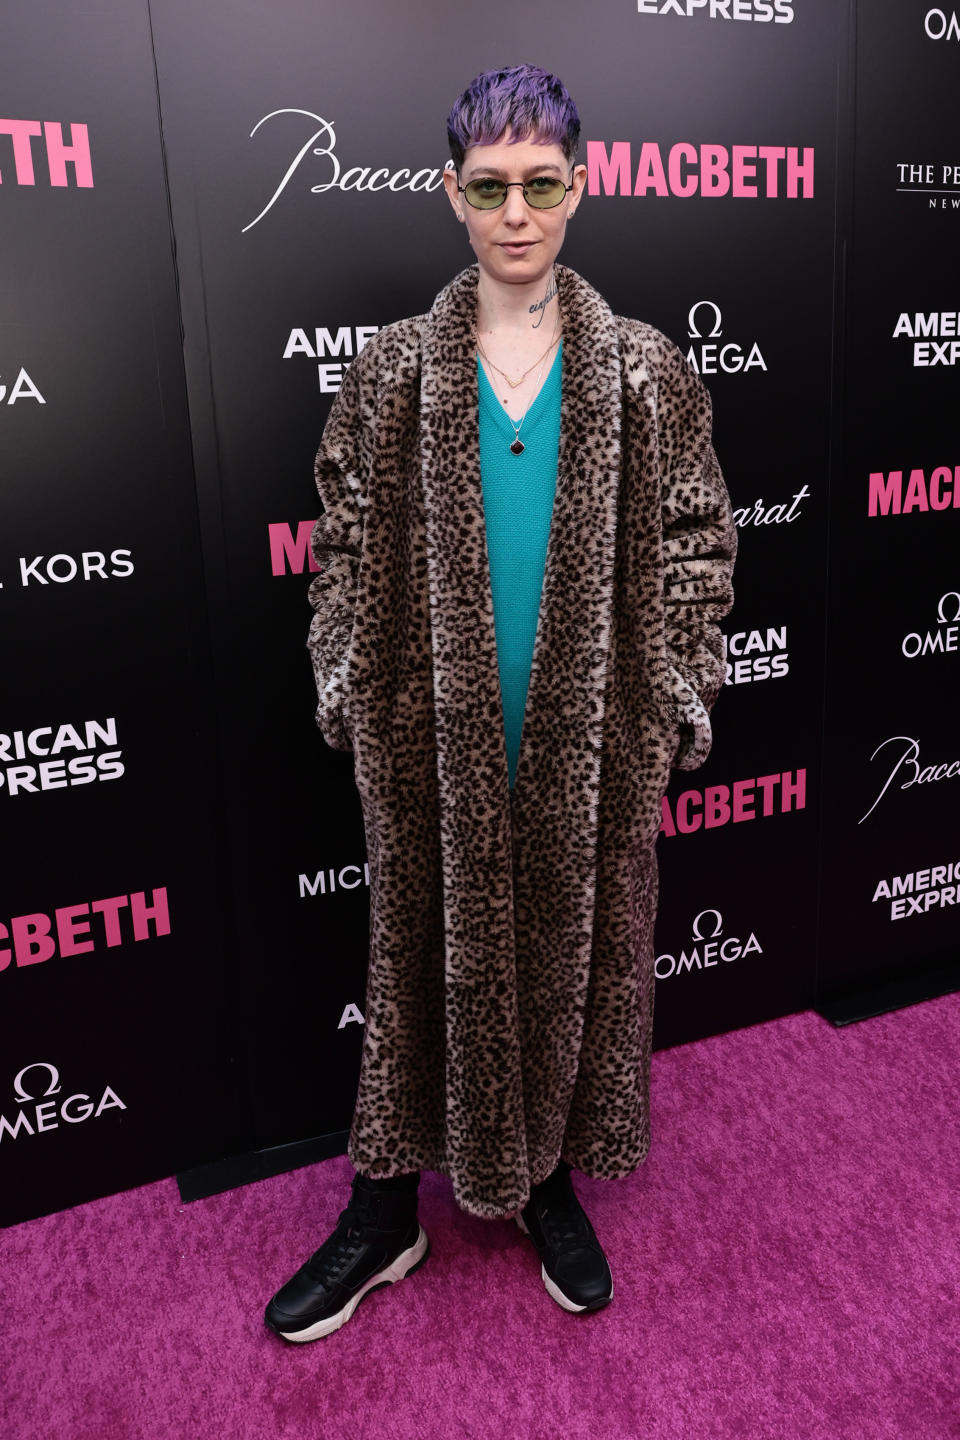 Asia Kate Dillon attends "MacBeth" Broadway Opening Night at Longacre Theatre